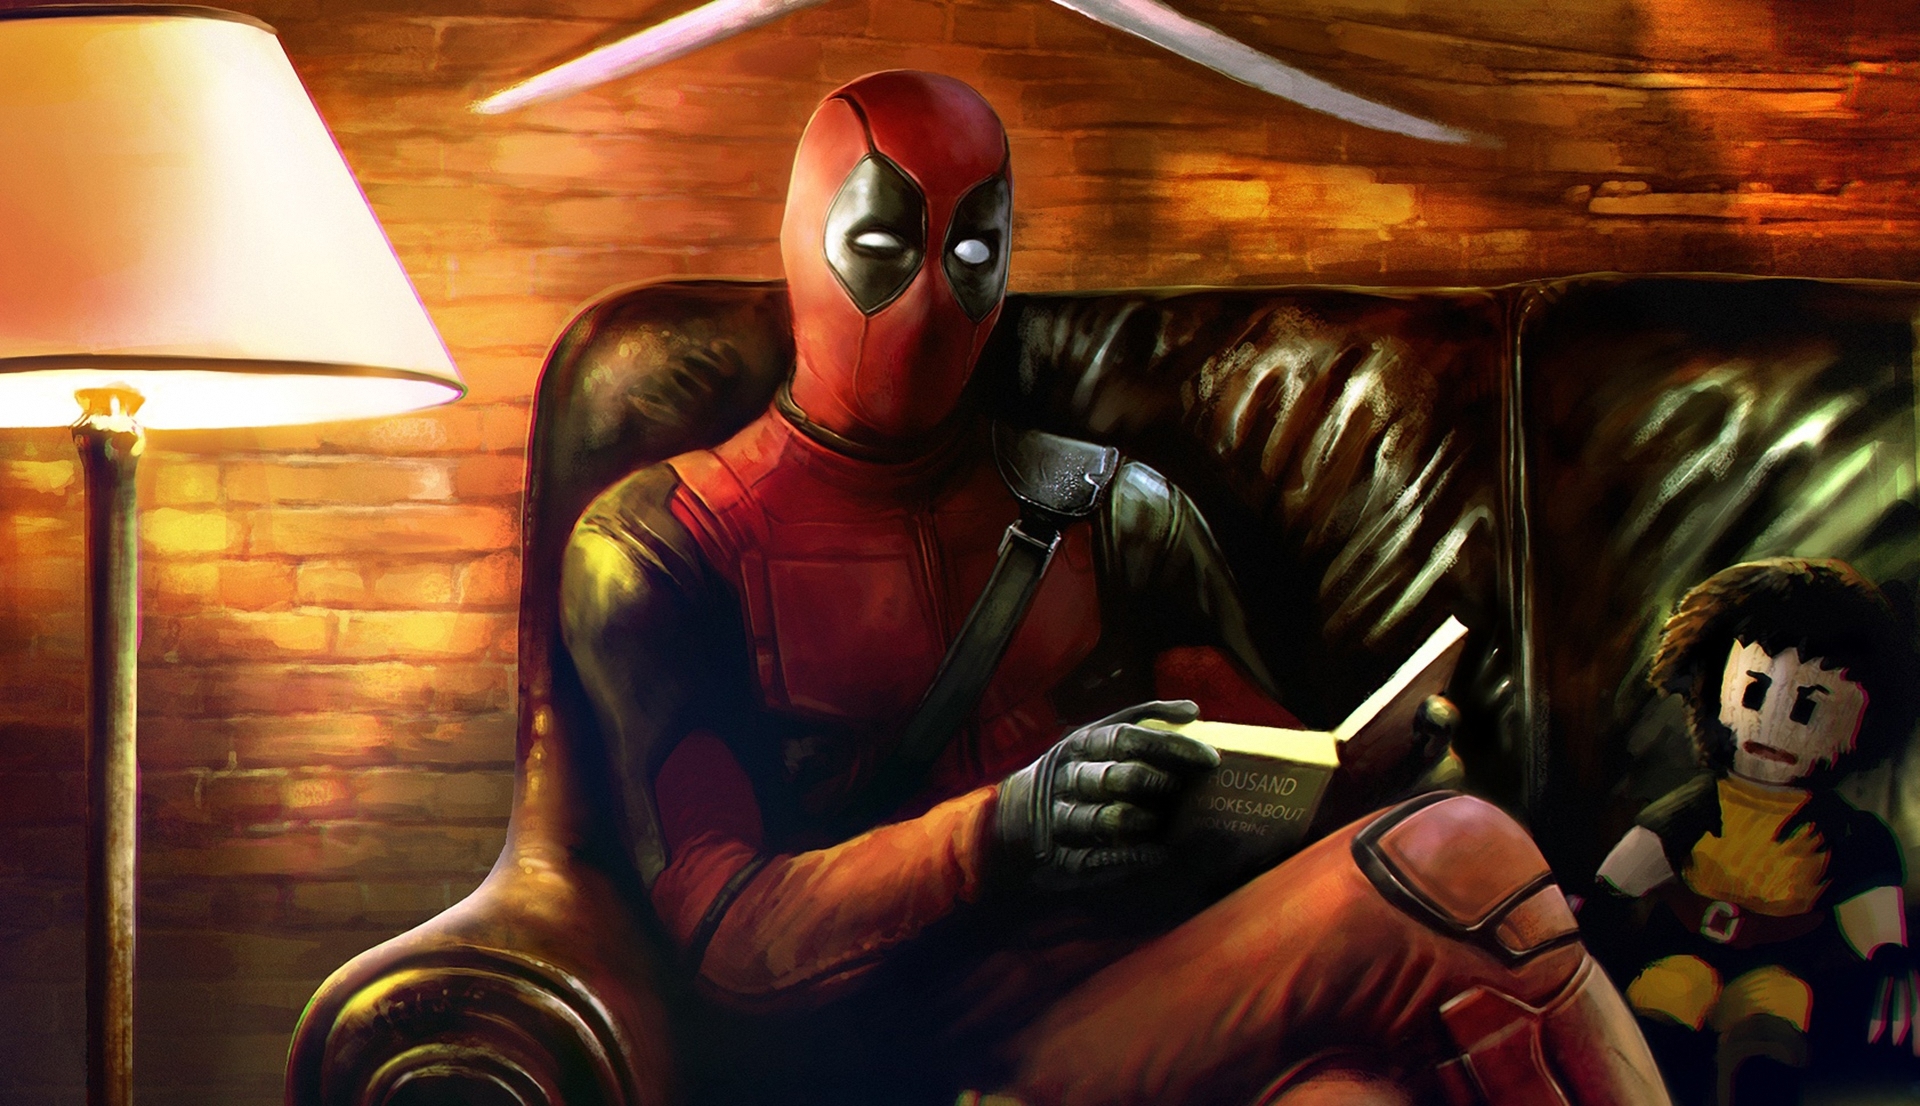 Deadpool (AKA Wade Wilson) wears his signature red and black suit. He is seated on a couch holding an open book, and next to him is a stuffed Wolverine (the superhero, not the carnivore) toy.